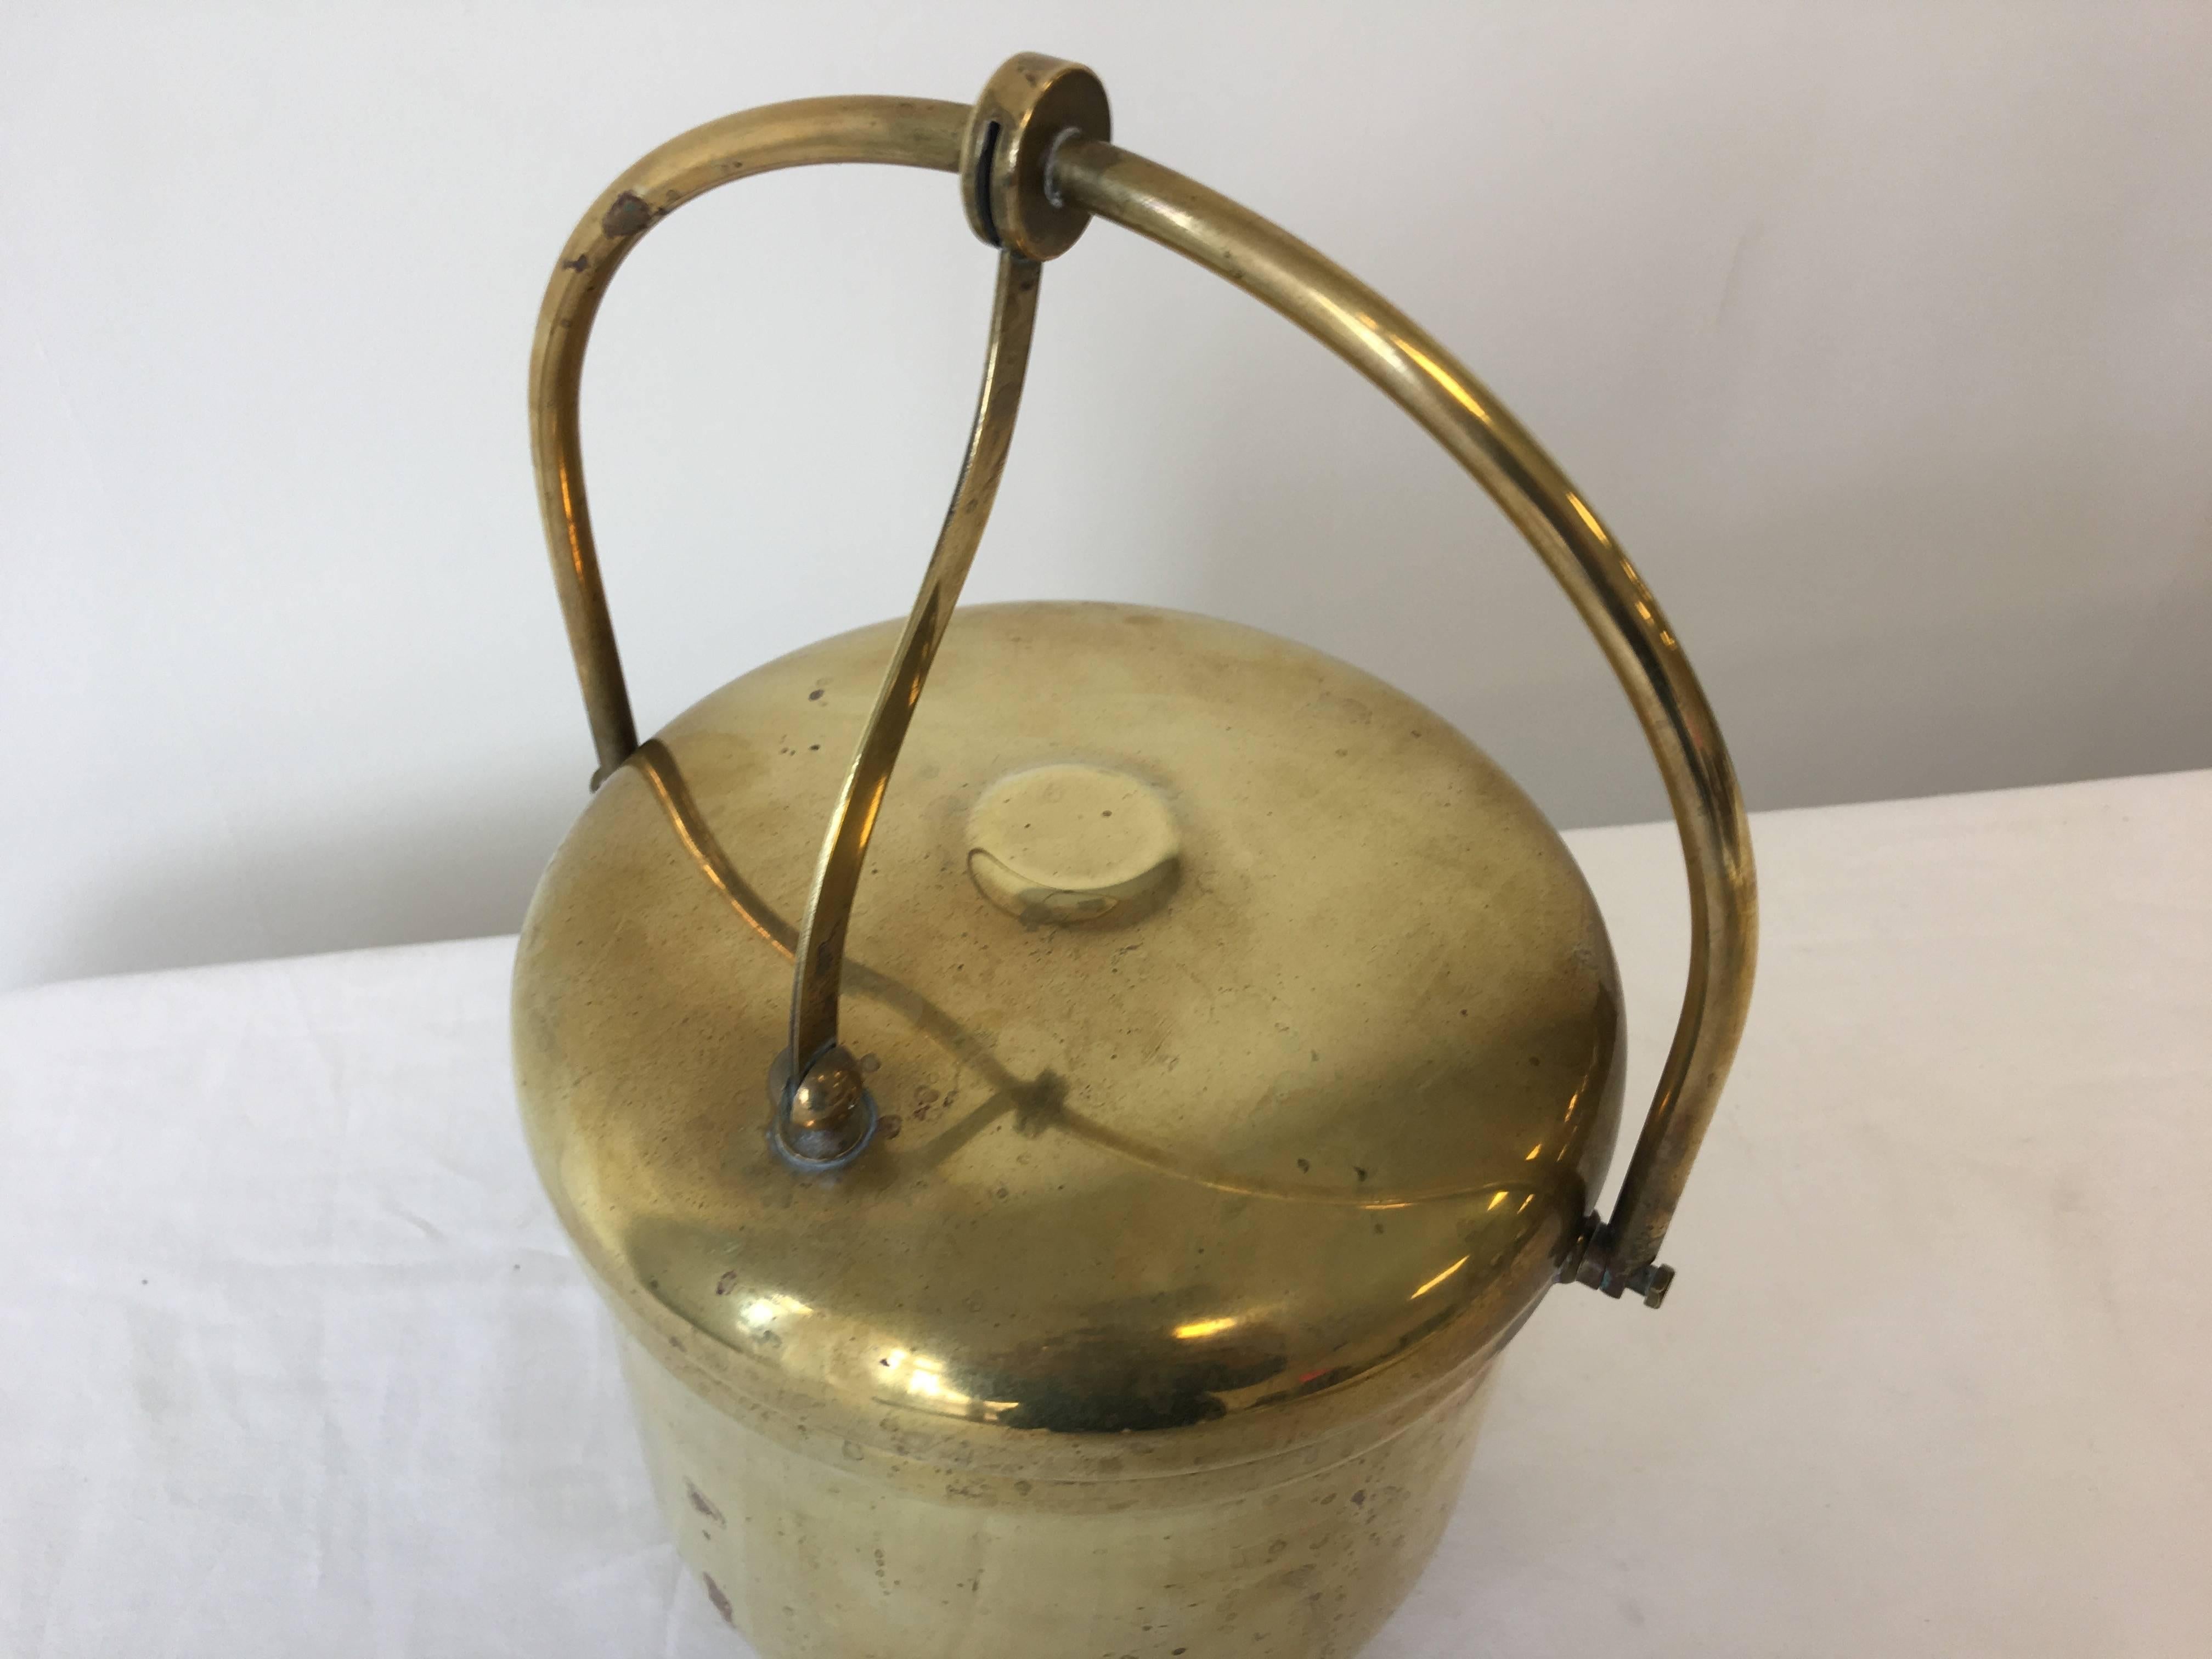 Offered is a beautiful, 1920s brass ice bucket with porcelain liner.